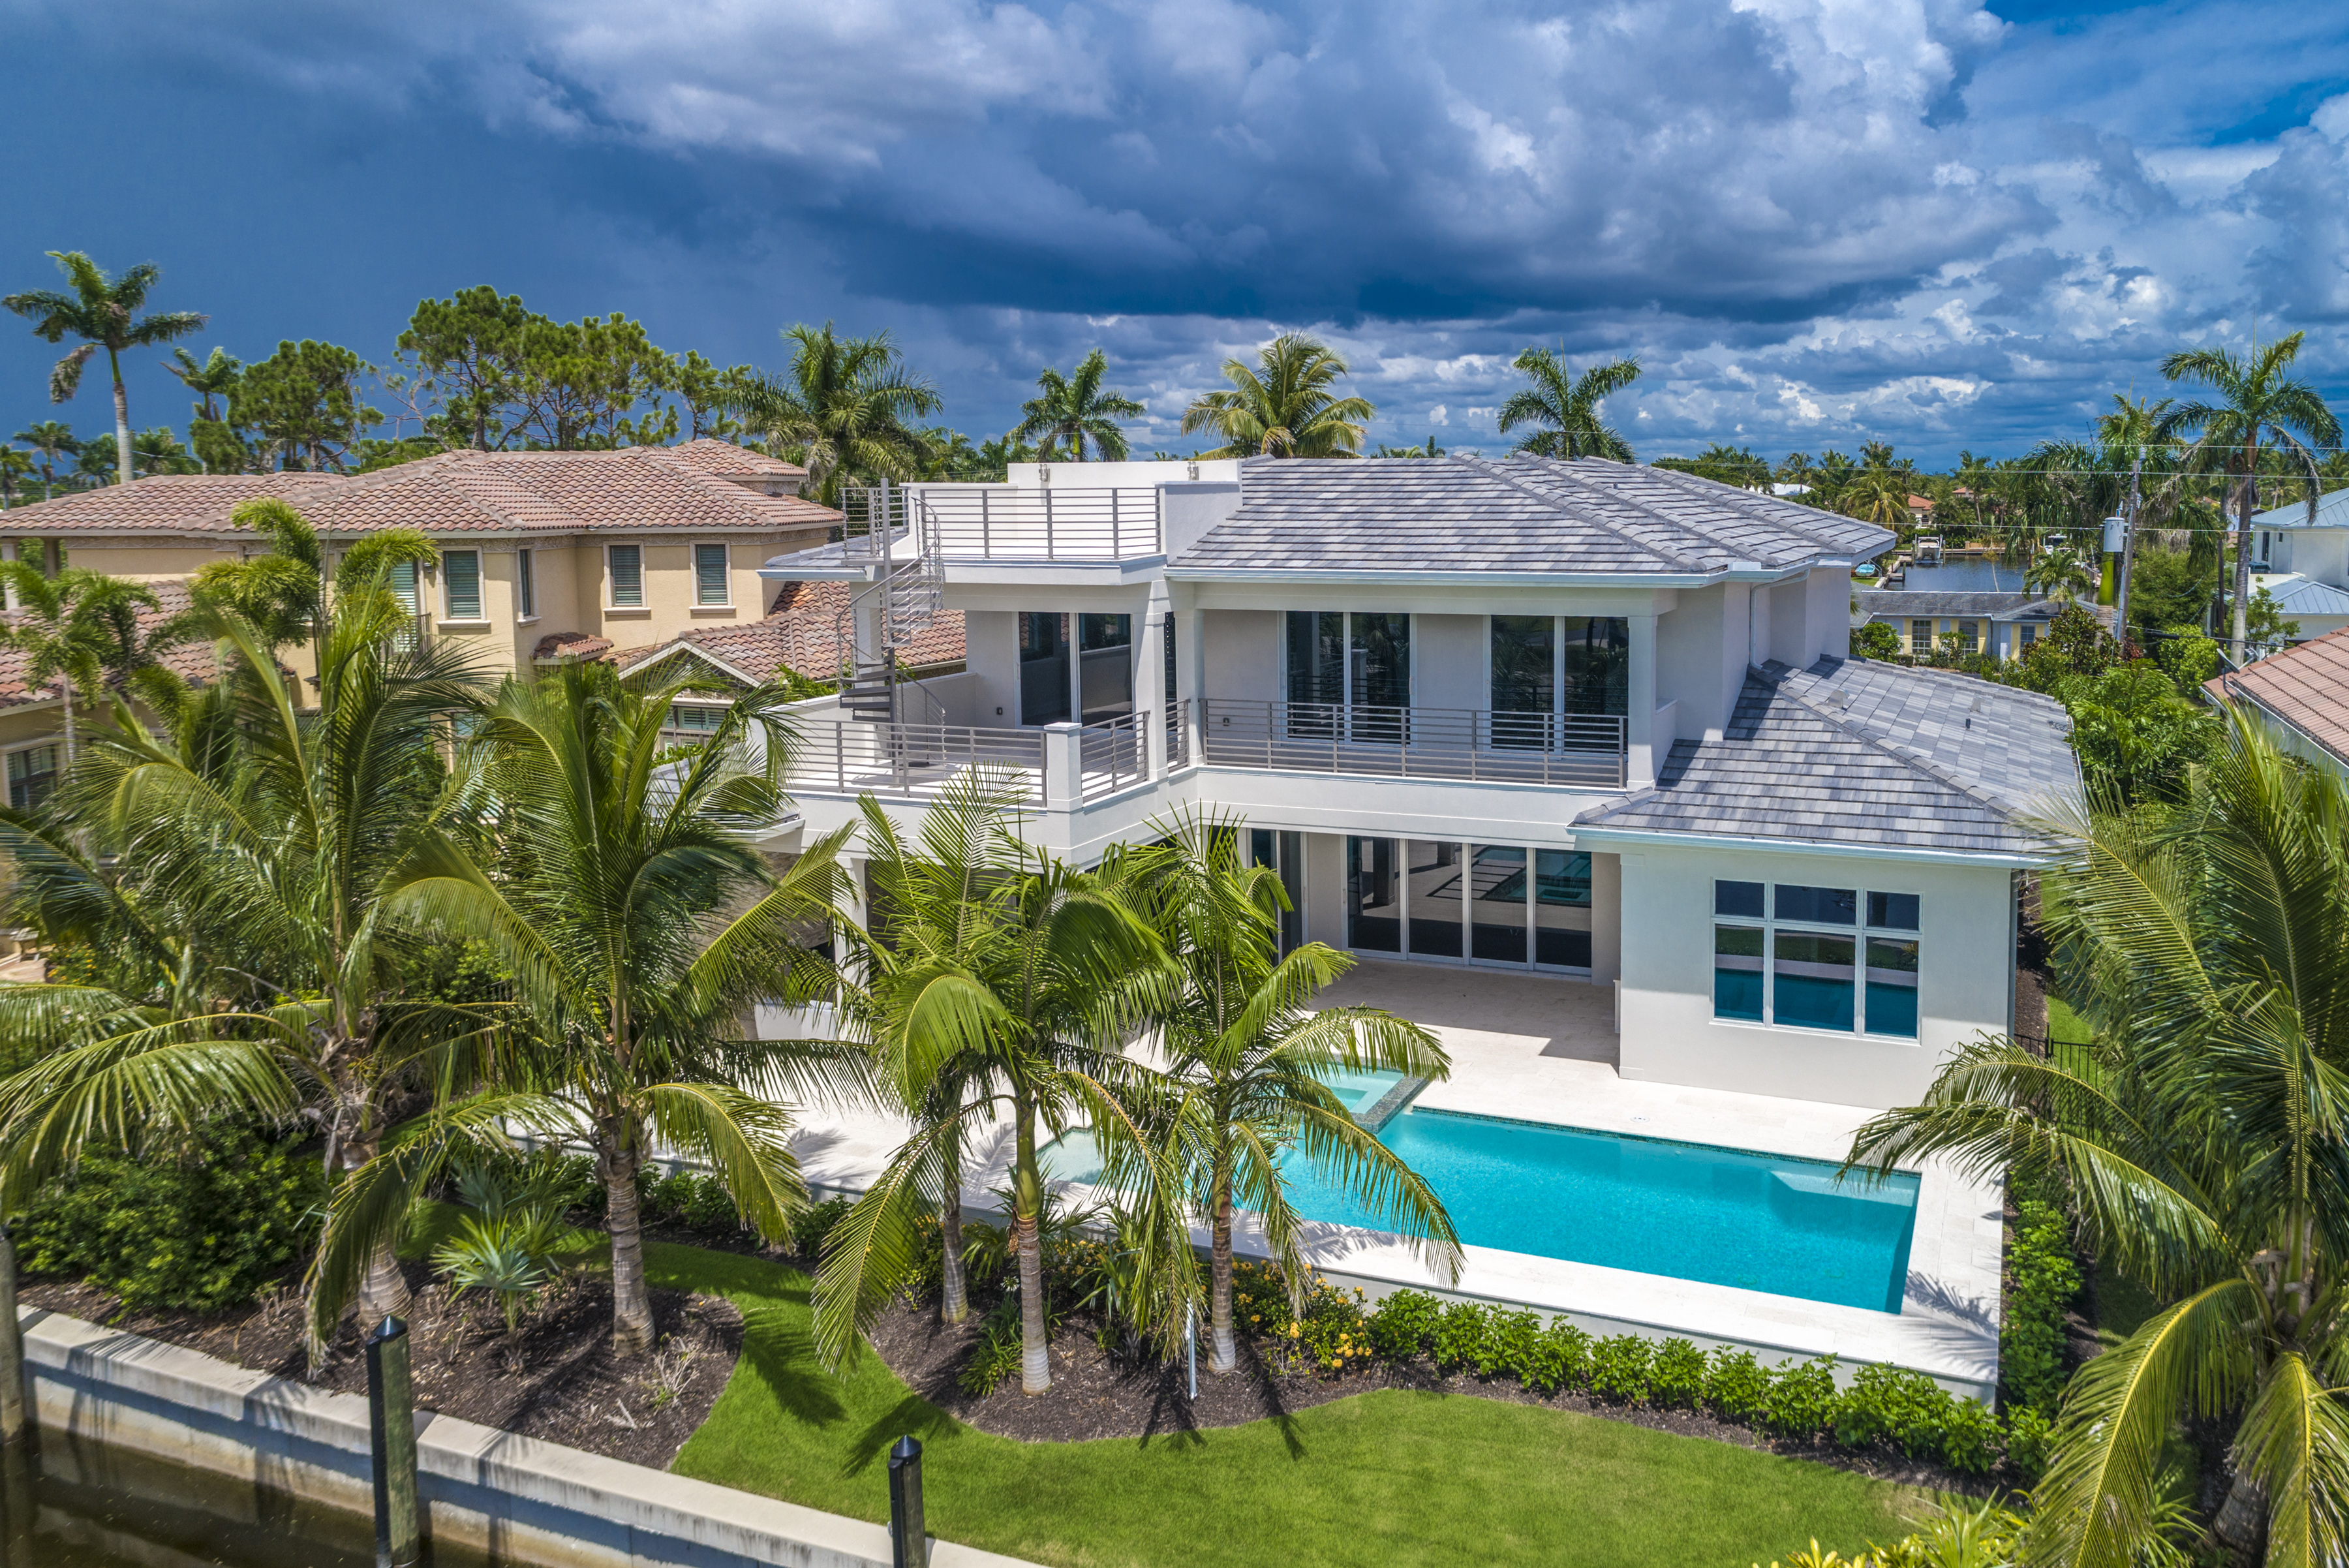 Clive Daniel Home Selected for 2-Story Waterfront Tarpon Road Custom Home Interiors